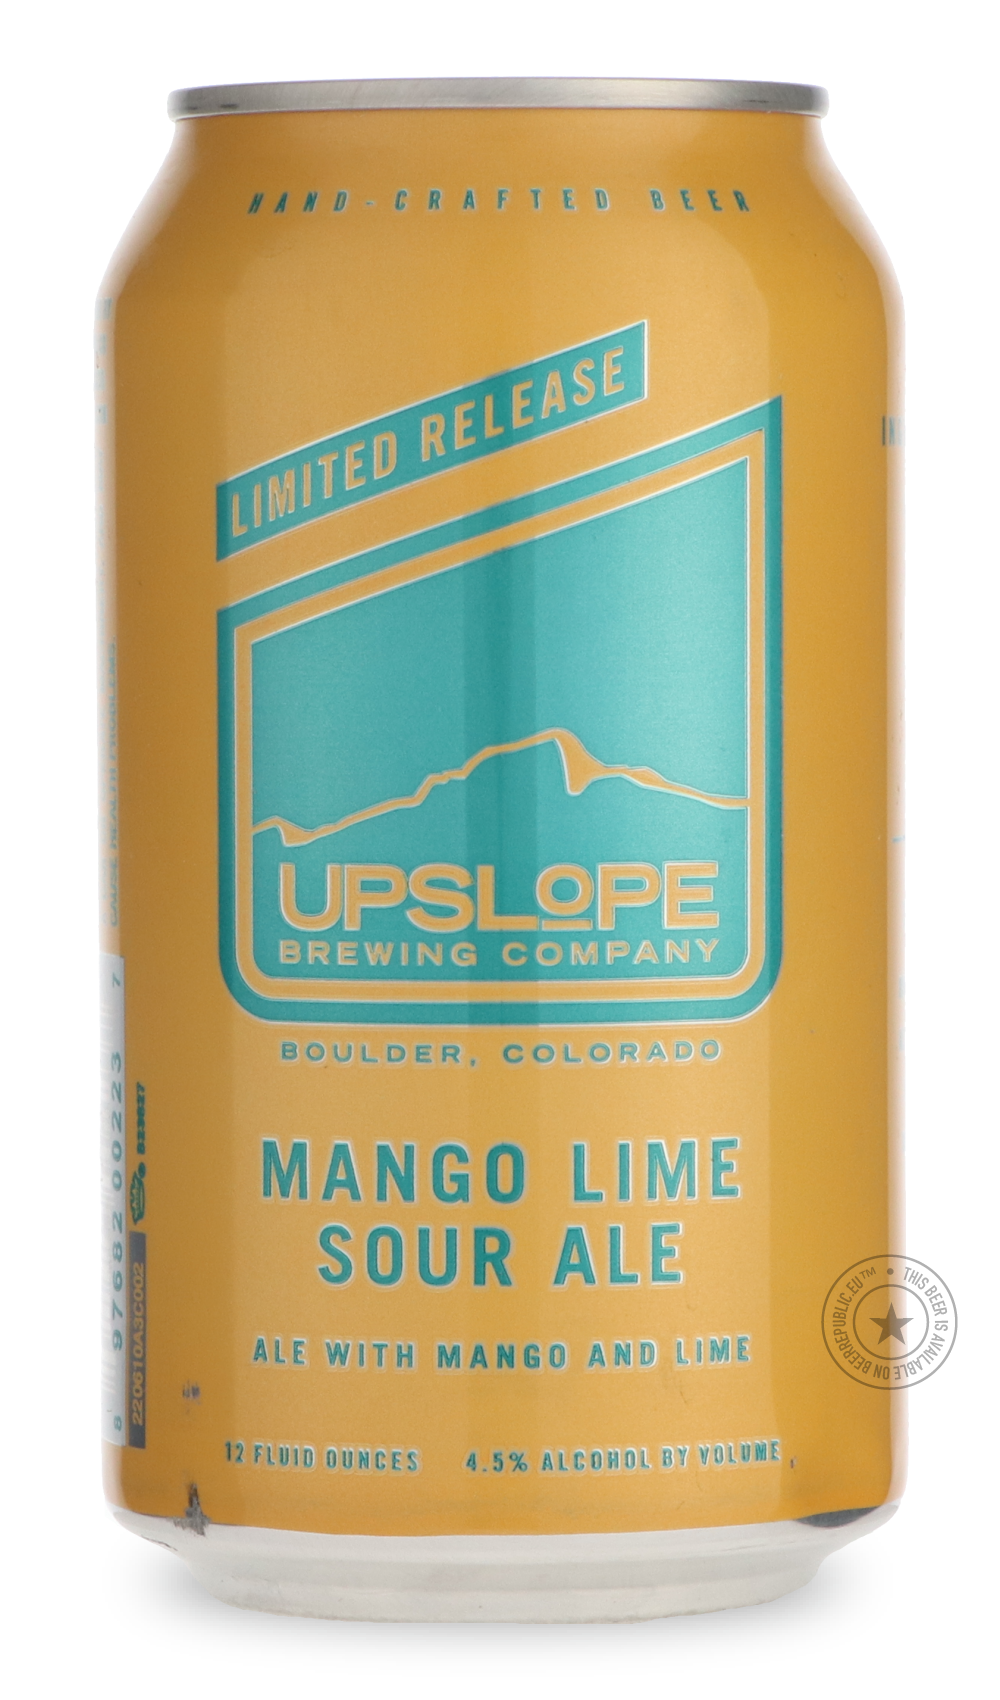 -Upslope- Mango Lime Sour Ale-Sour / Wild & Fruity- Only @ Beer Republic - The best online beer store for American & Canadian craft beer - Buy beer online from the USA and Canada - Bier online kopen - Amerikaans bier kopen - Craft beer store - Craft beer kopen - Amerikanisch bier kaufen - Bier online kaufen - Acheter biere online - IPA - Stout - Porter - New England IPA - Hazy IPA - Imperial Stout - Barrel Aged - Barrel Aged Imperial Stout - Brown - Dark beer - Blond - Blonde - Pilsner - Lager - Wheat - Wei